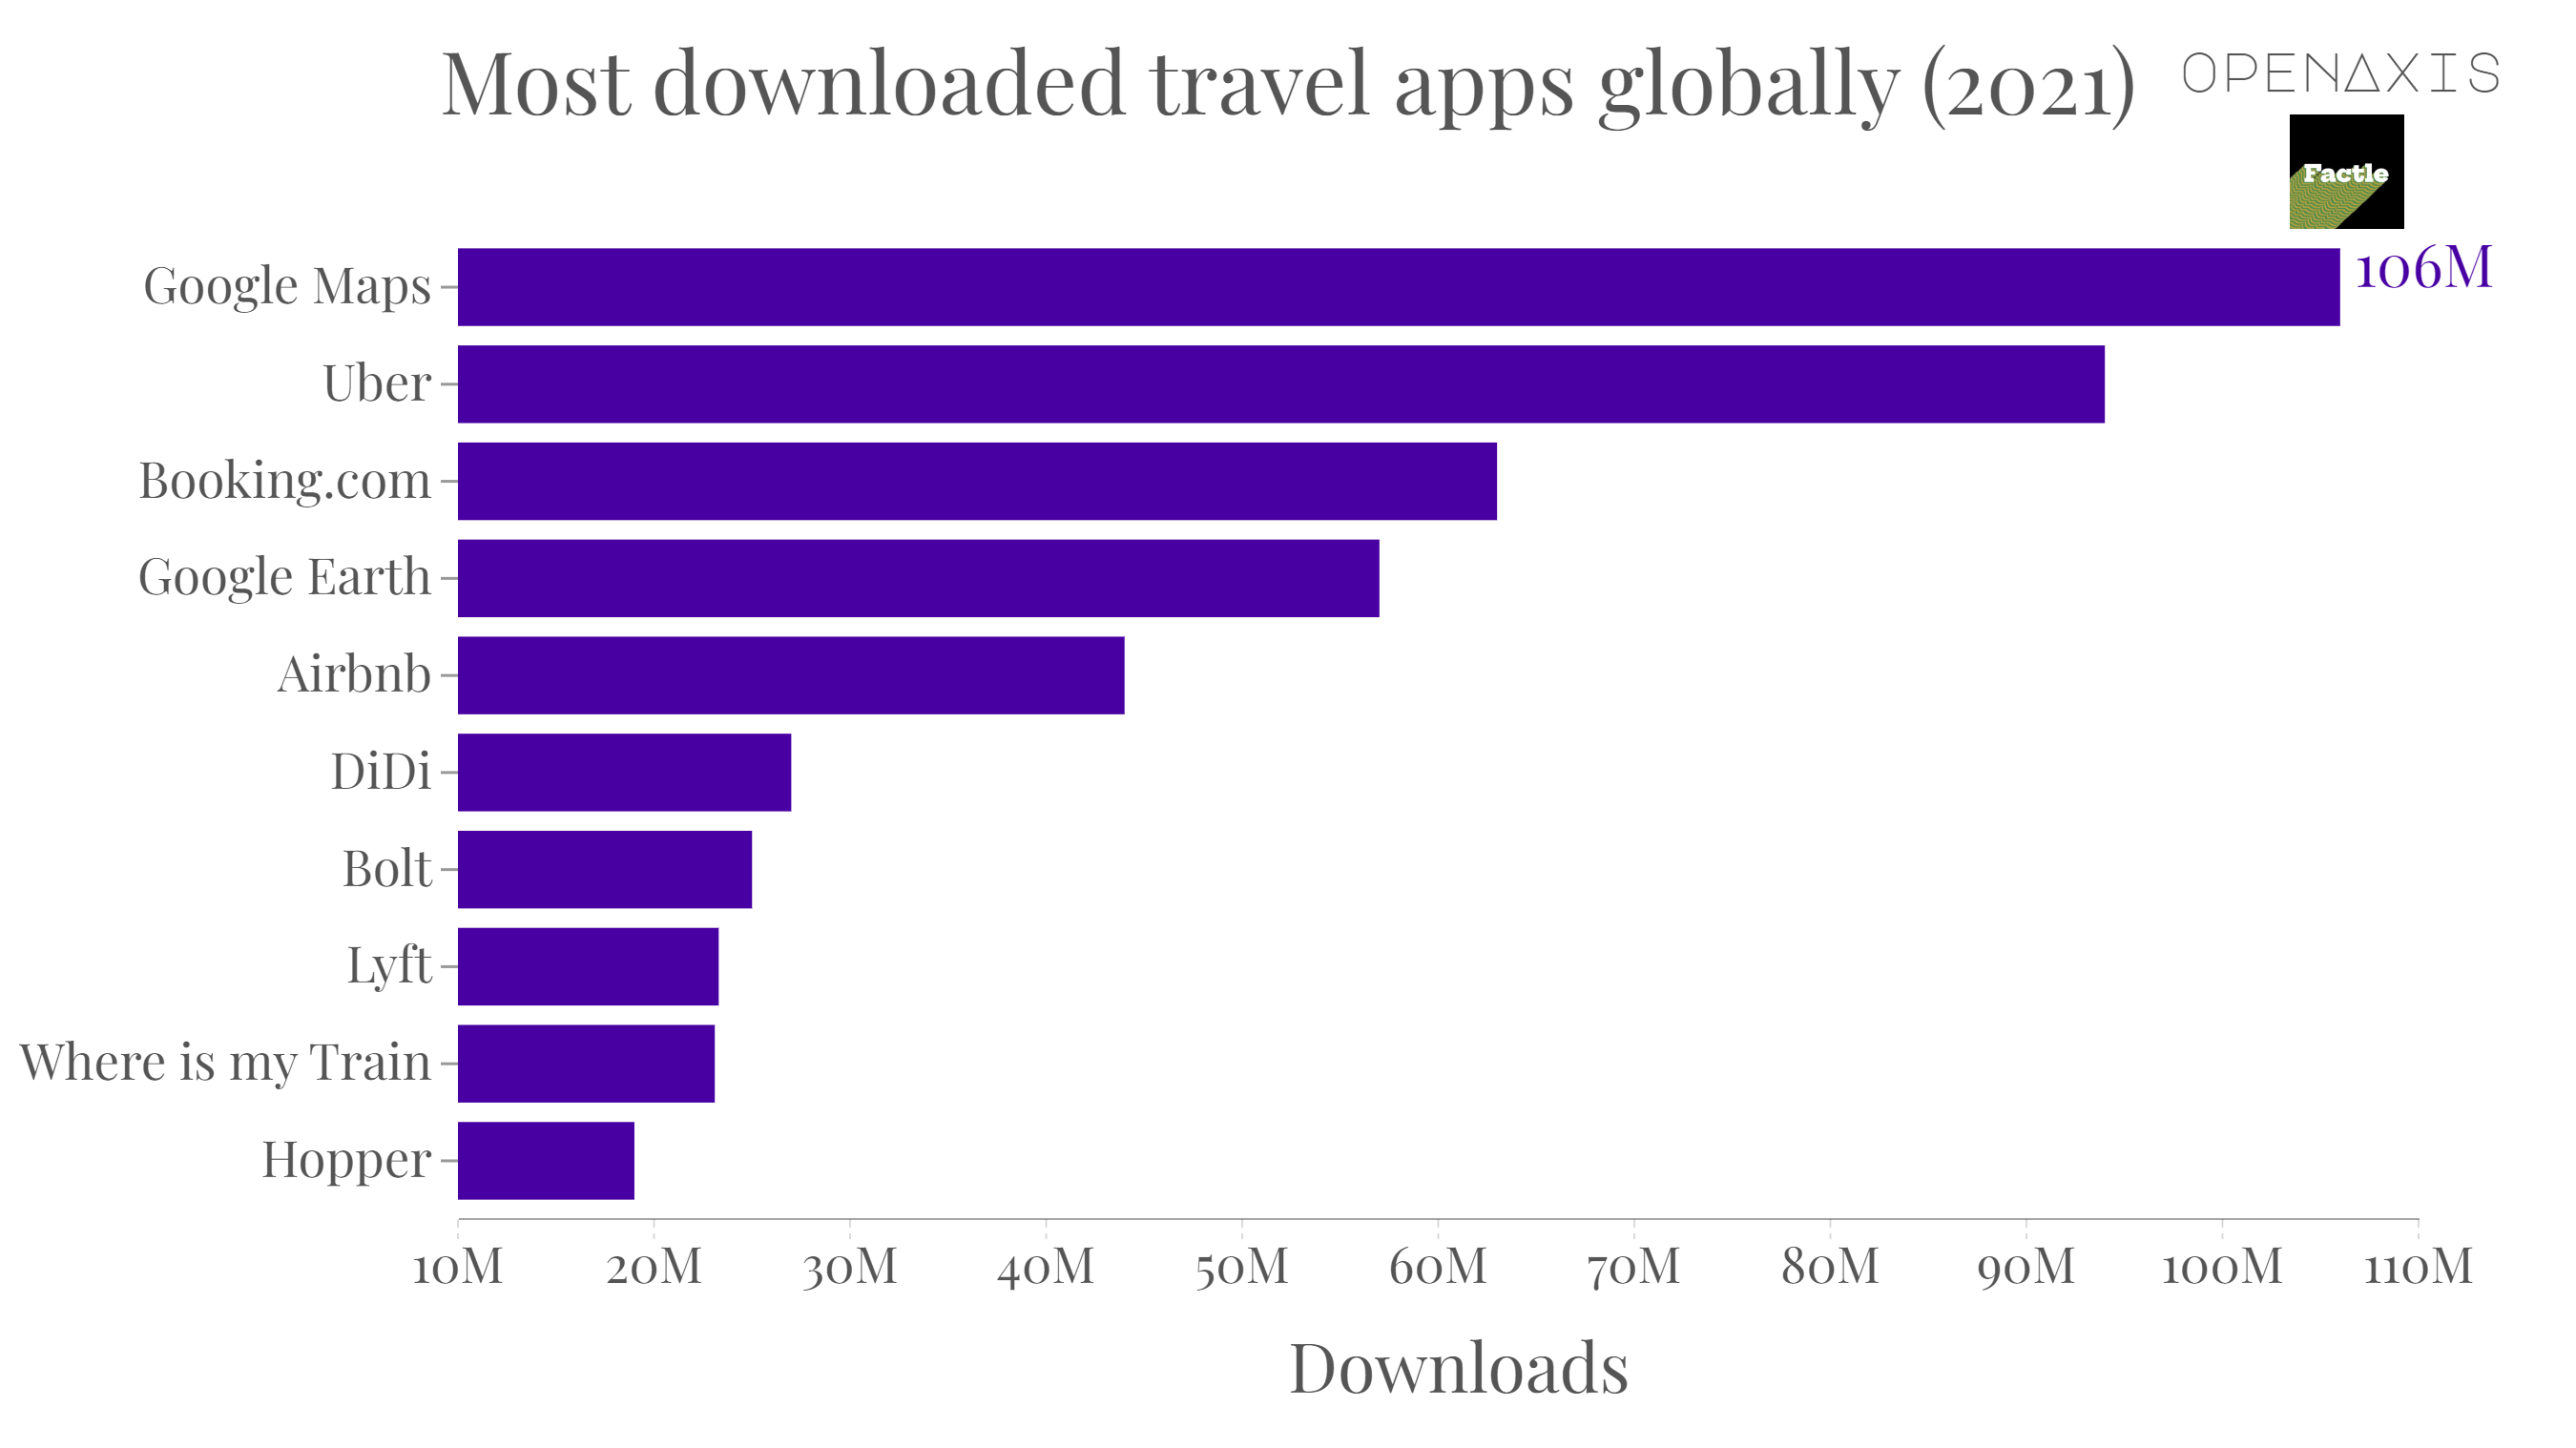 "Most downloaded travel apps globally (2021)"